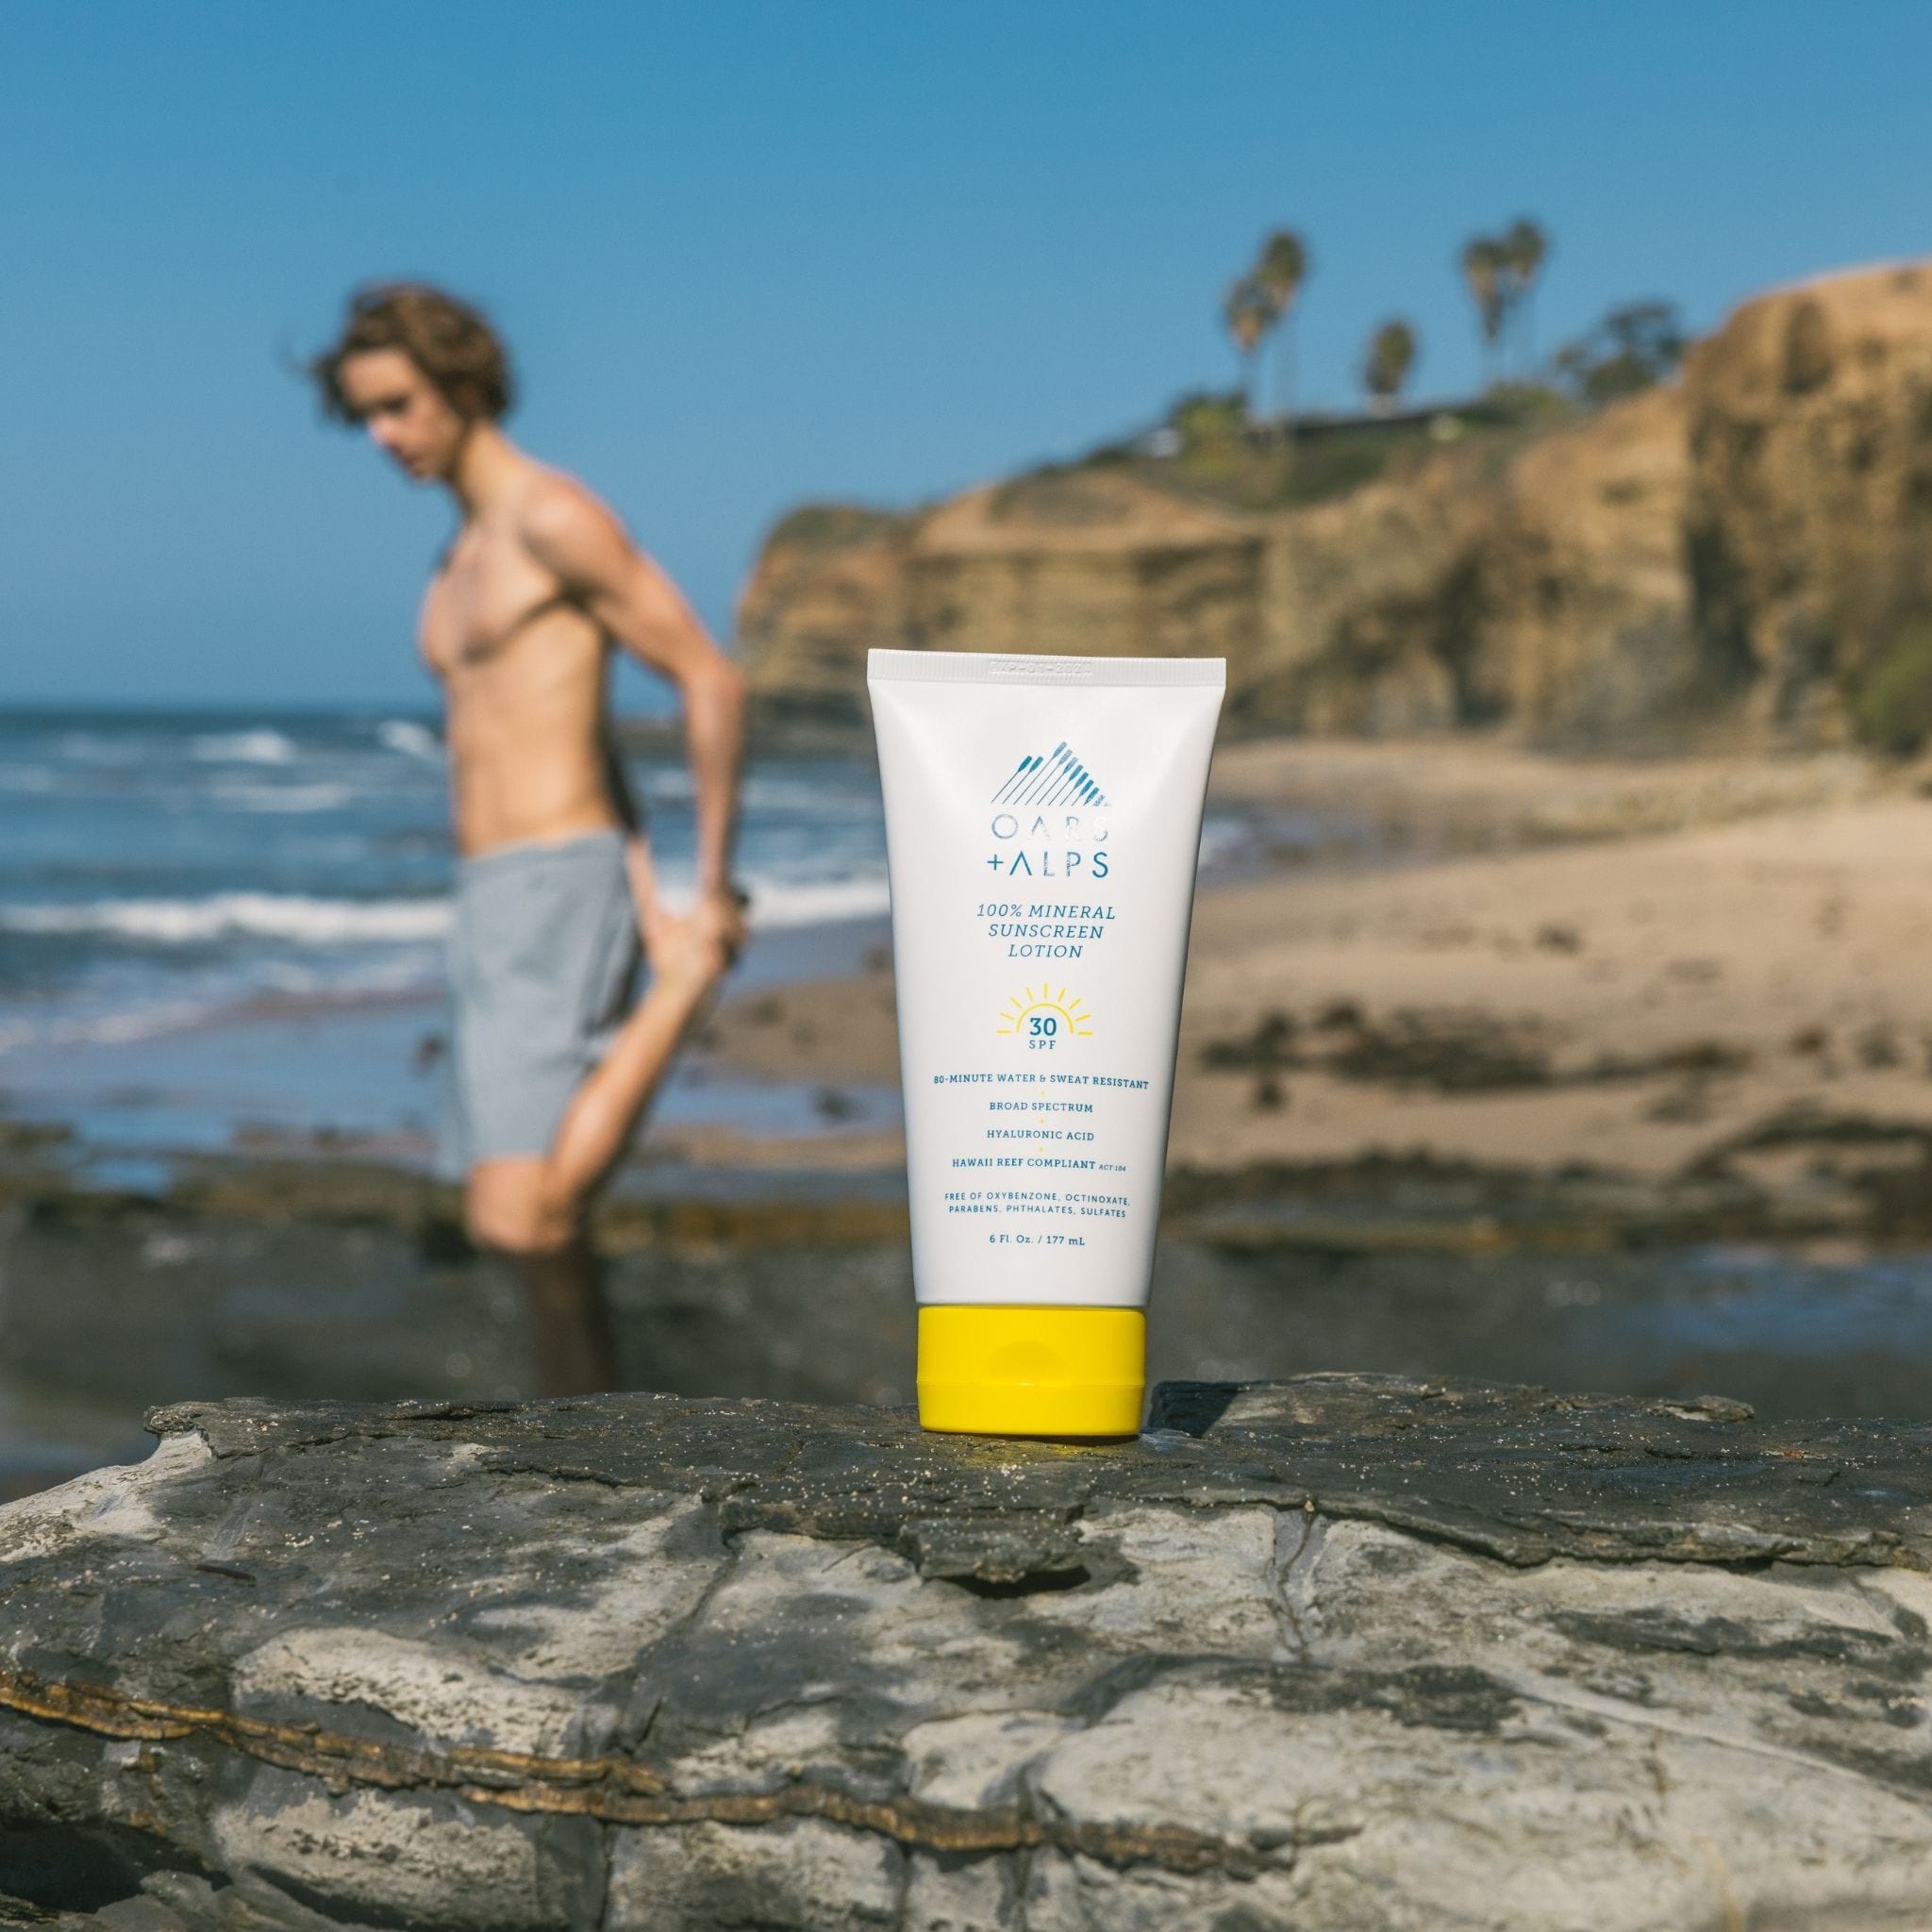 100% Mineral Sunscreen Lotion with SPF 30